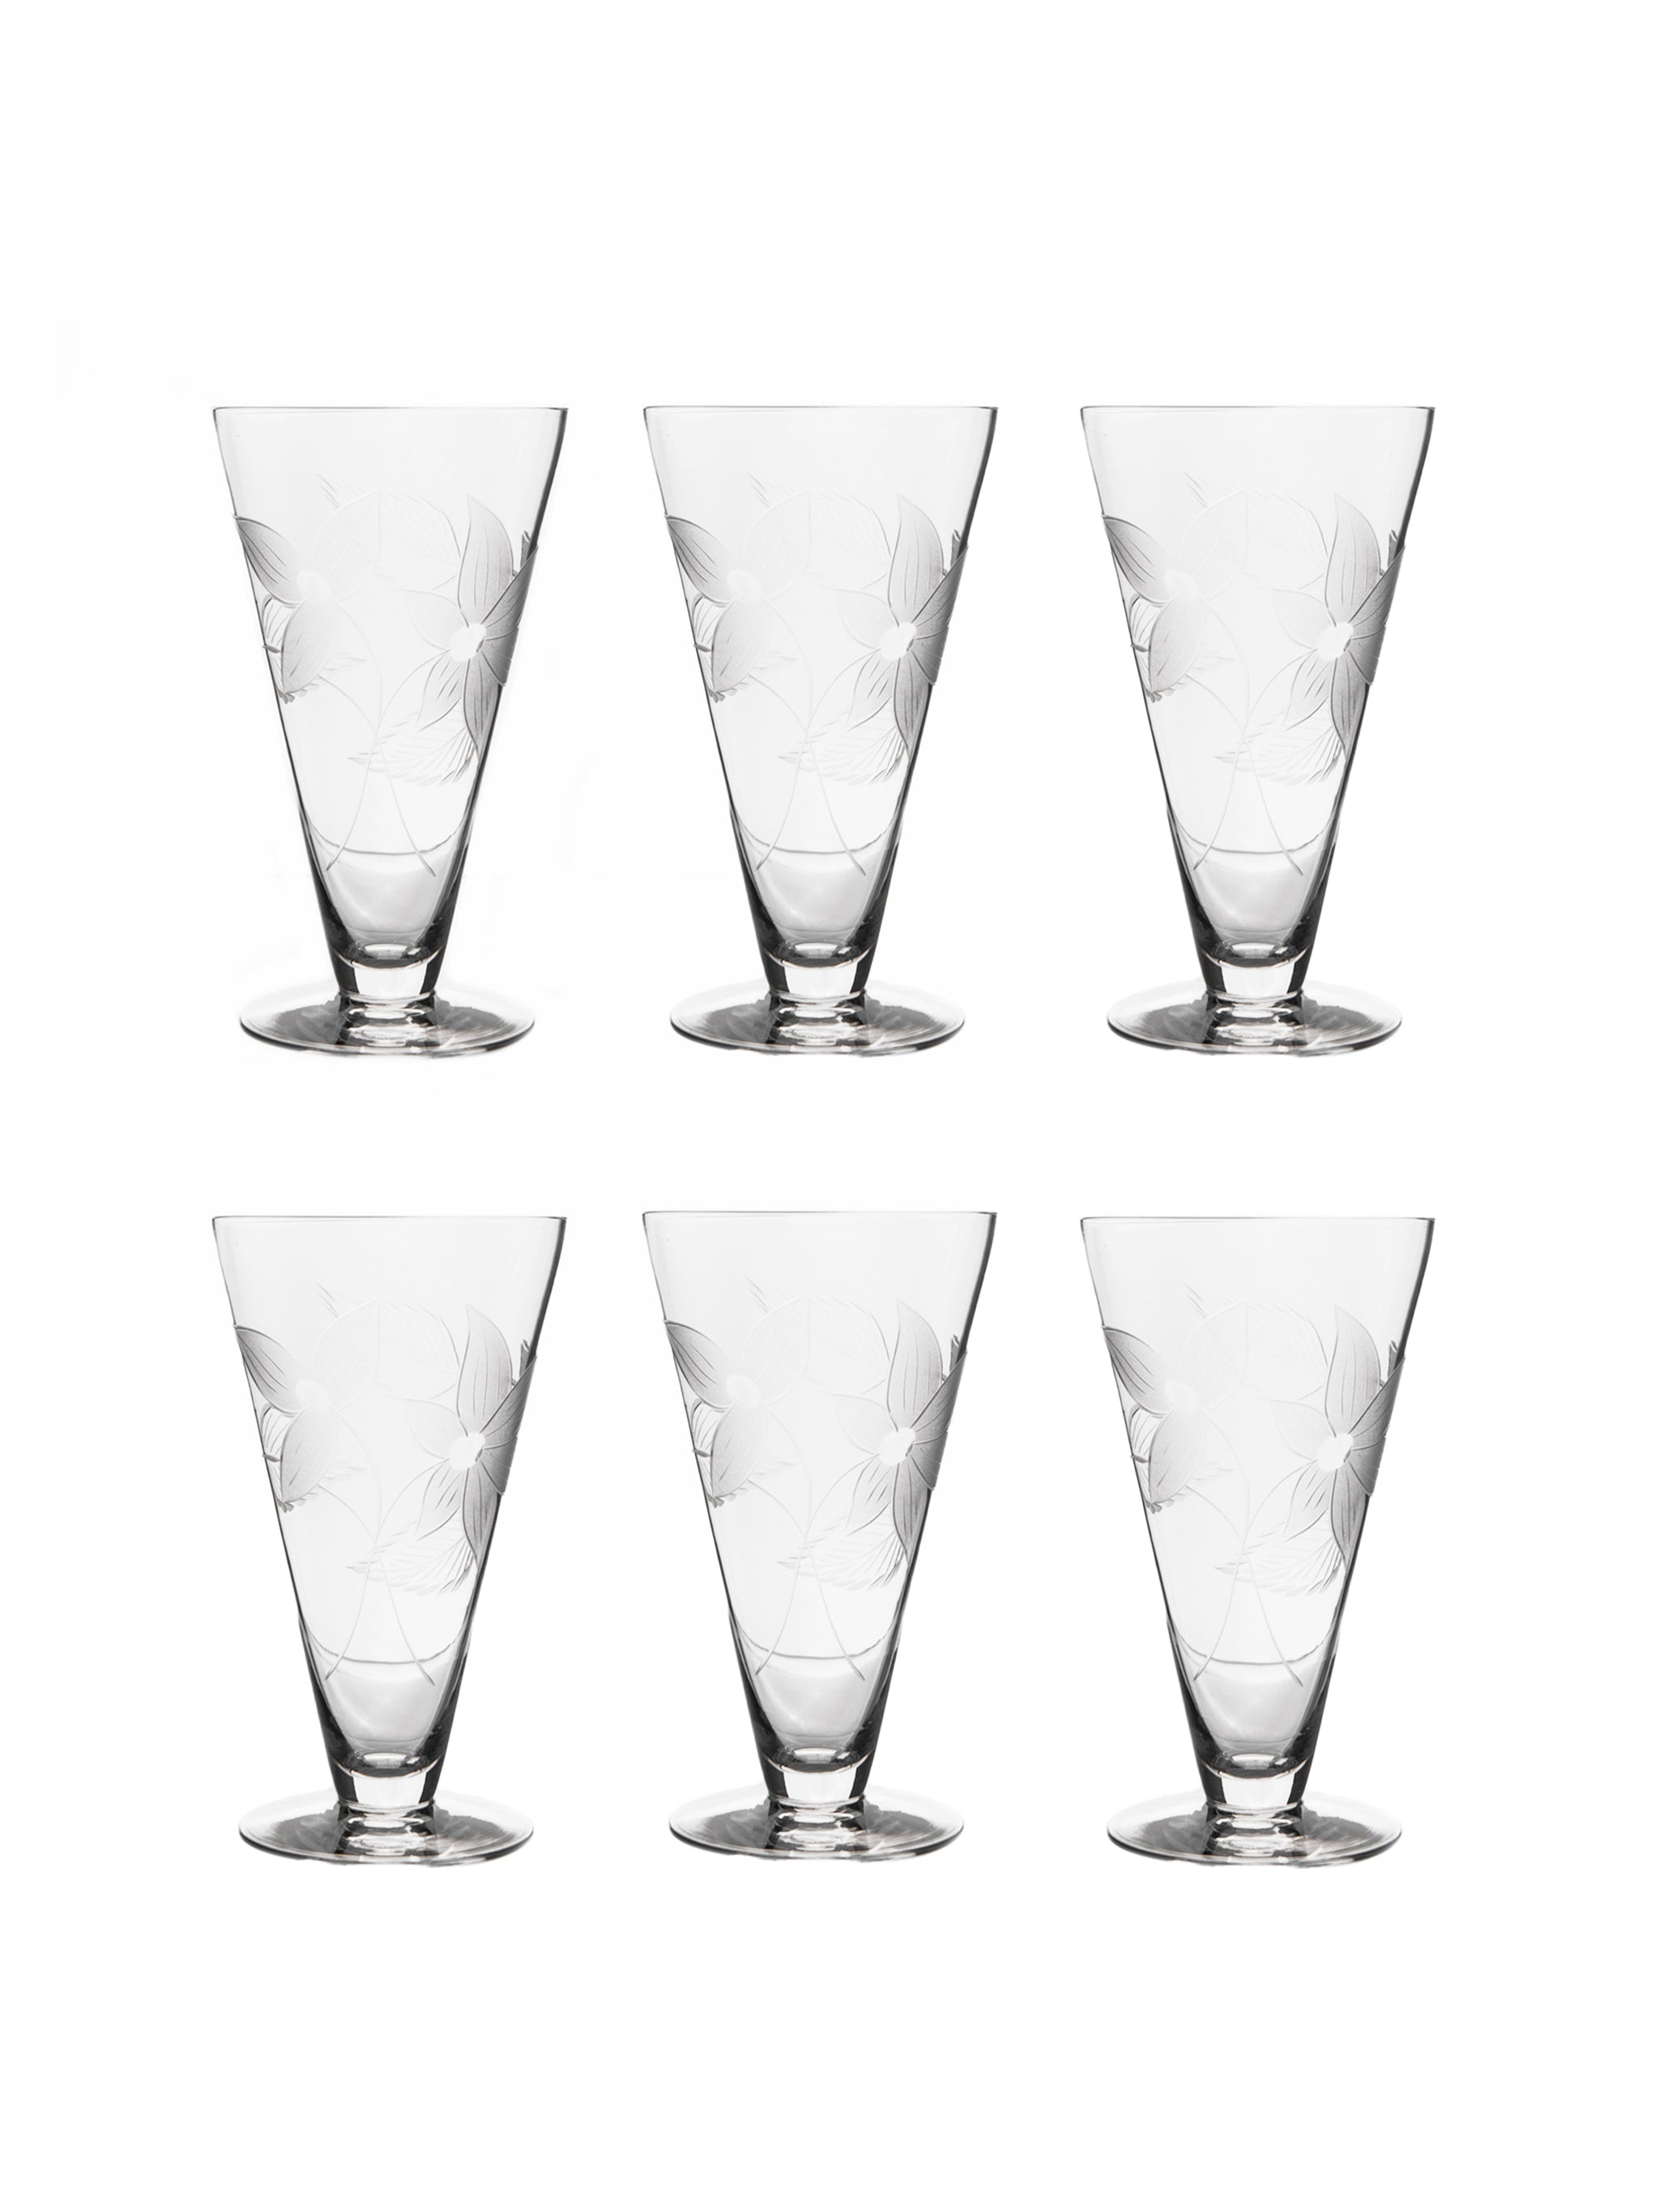 Shop the Vintage Mid Century Clematis Footed Collins Glasses at